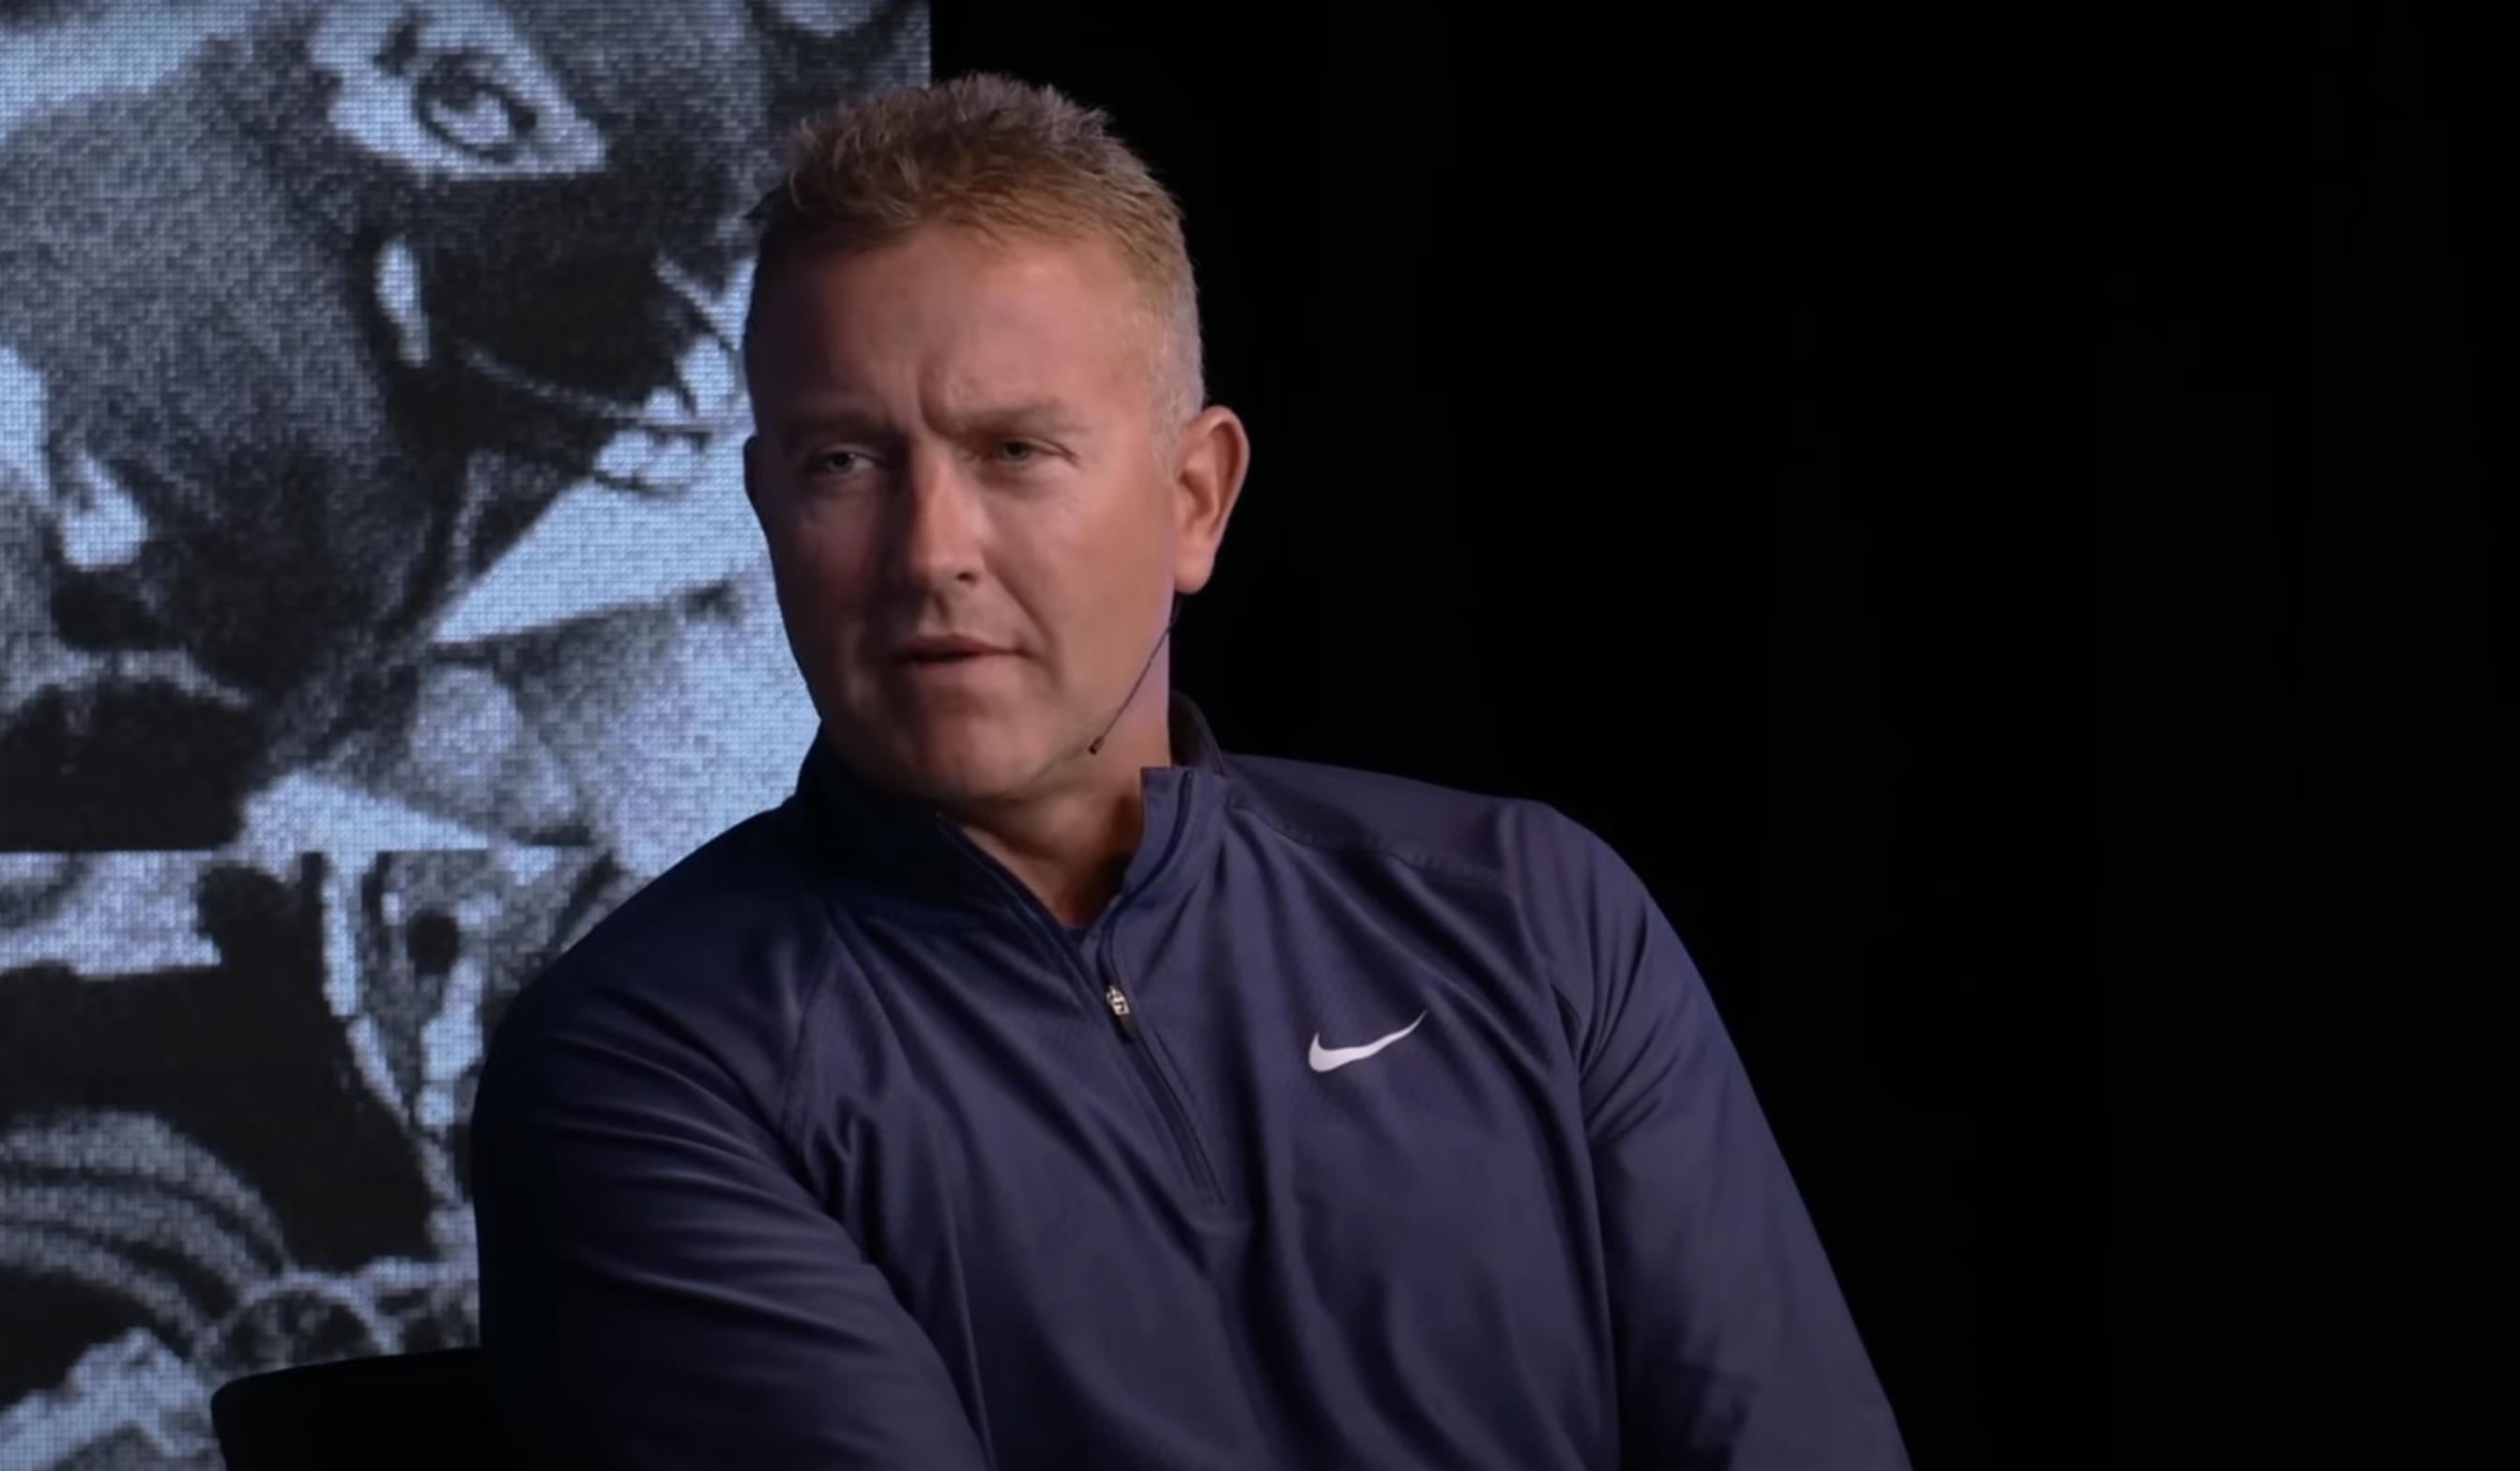 Kirk Herbstreit during a recent interview with Fresh Life Church's "Faith and Football" program.